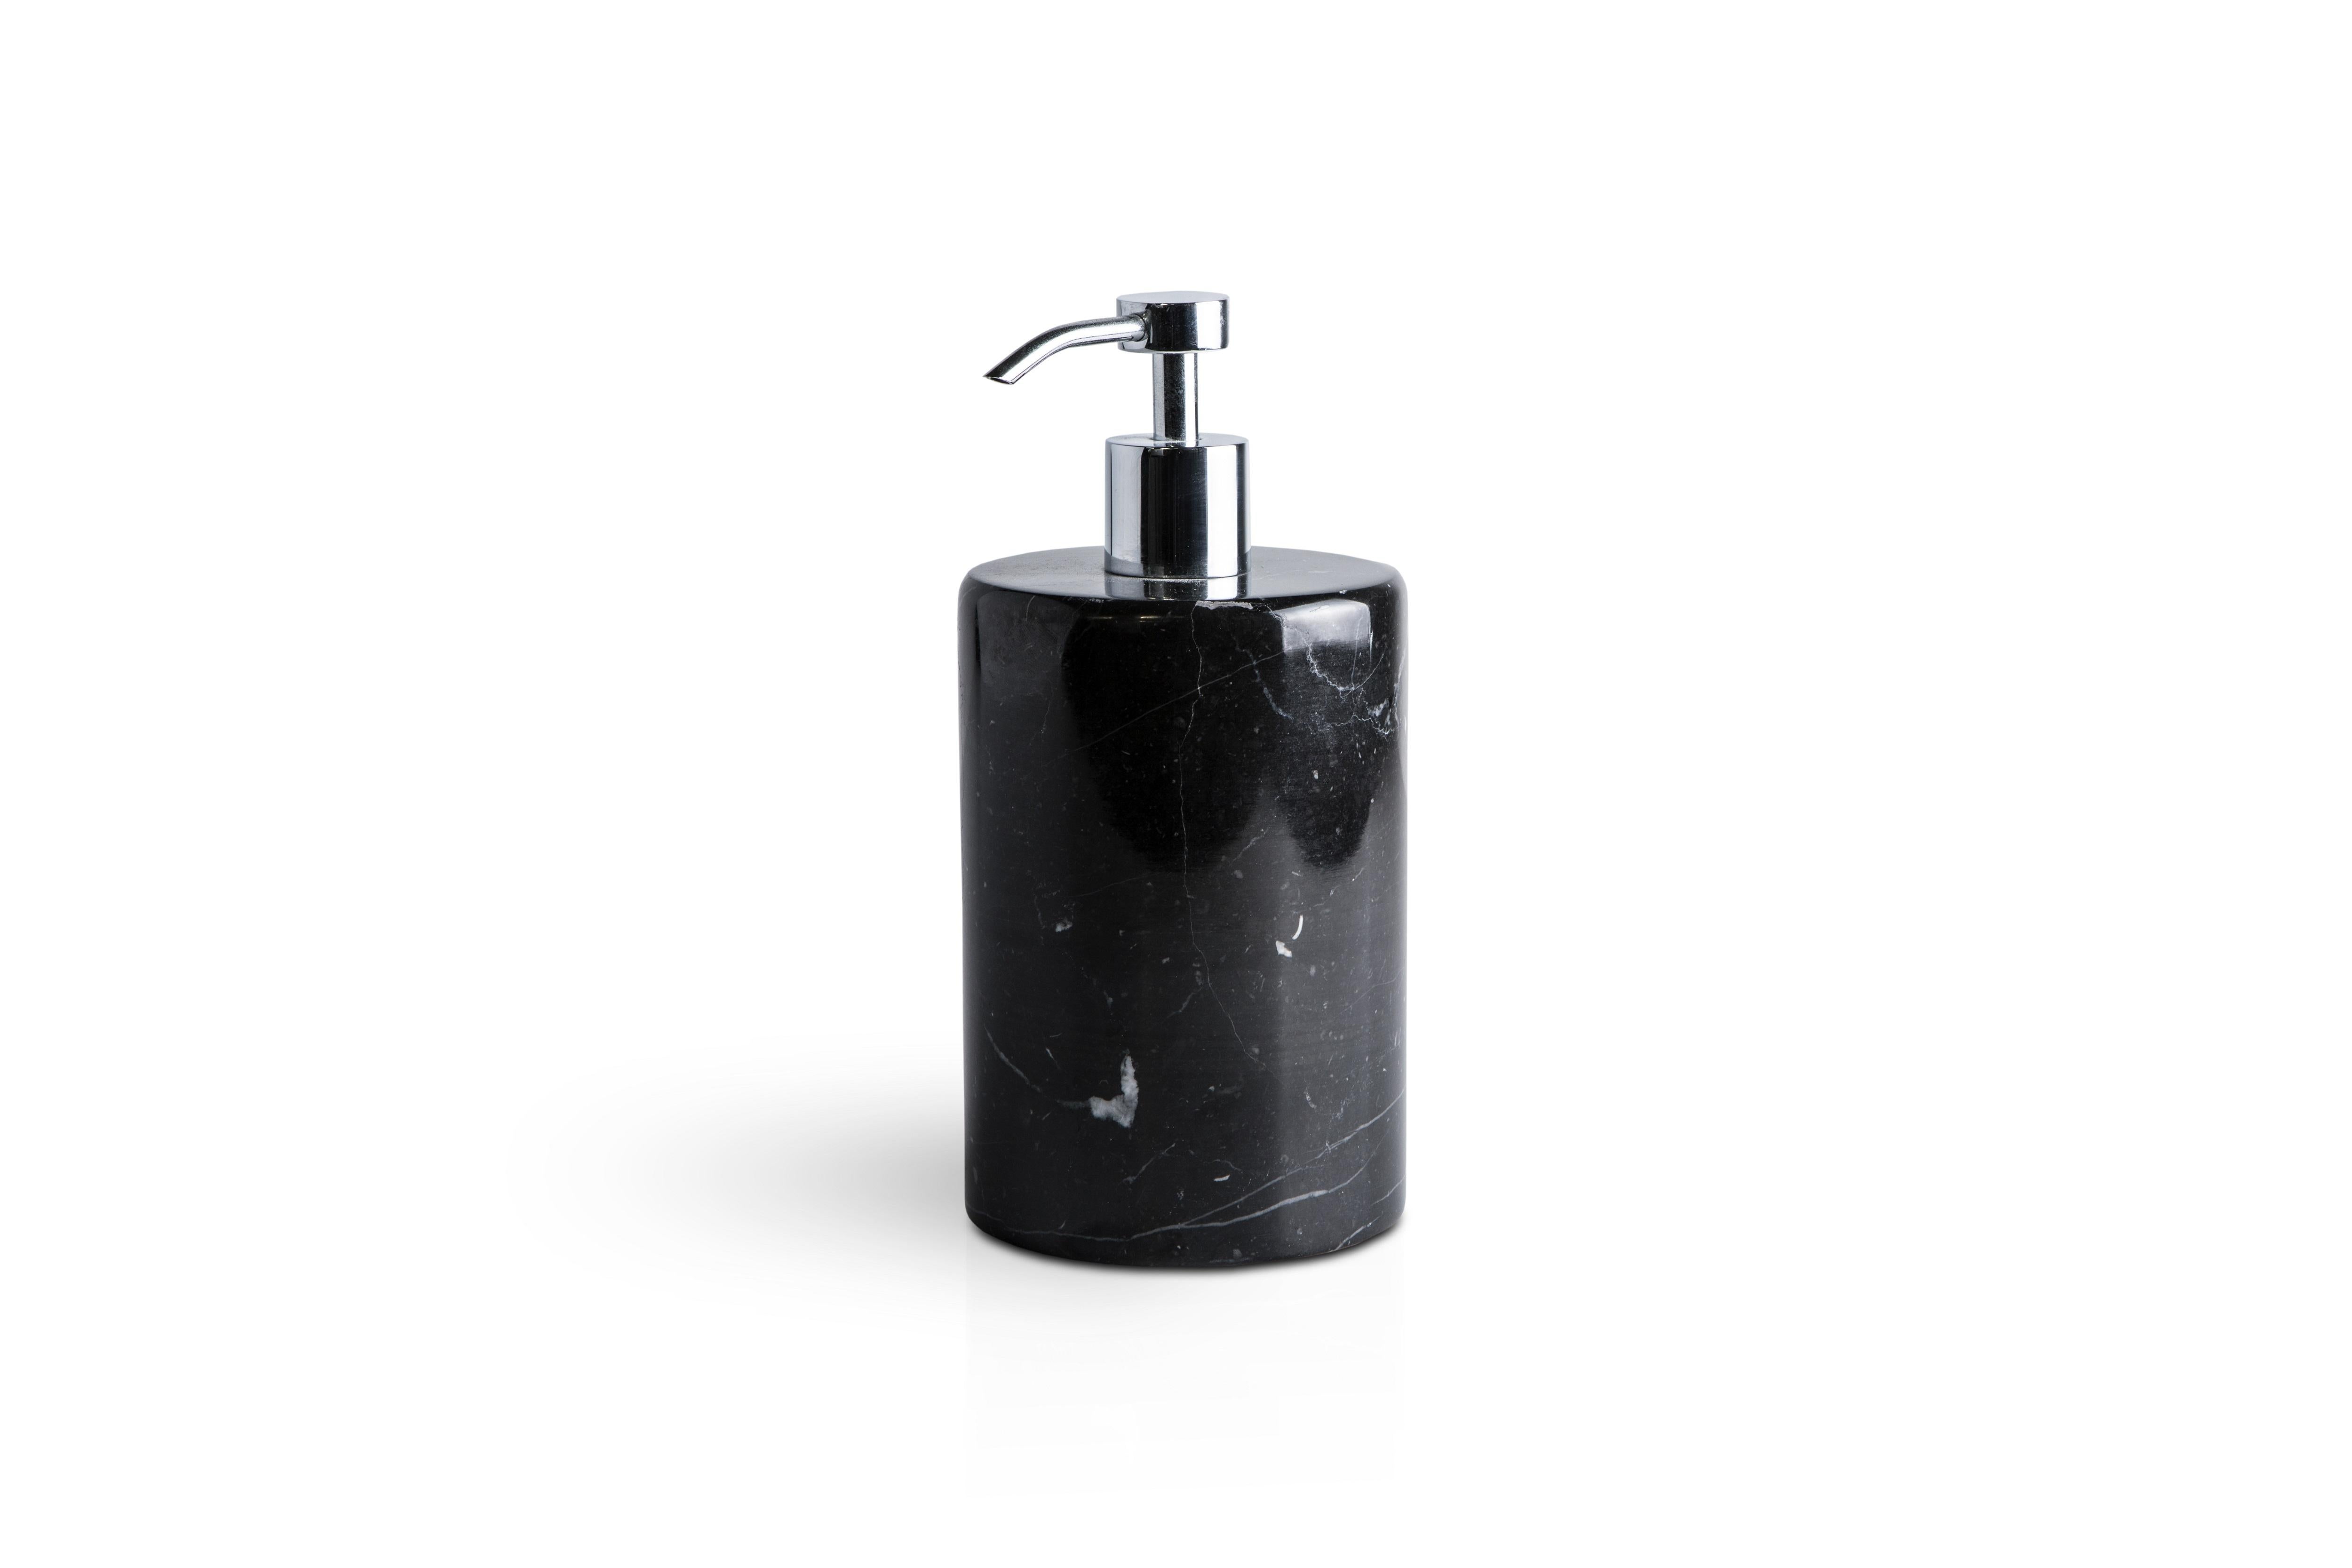 A rounded set for the bathroom in black Marquina marble which includes: One soap dispenser (diameter 9 x 19.5 cm), one toothbrush holder (diameter 7 x 12 cm), one soap dish (diameter 10 x 2 cm).
Each piece is in a way unique (since each marble